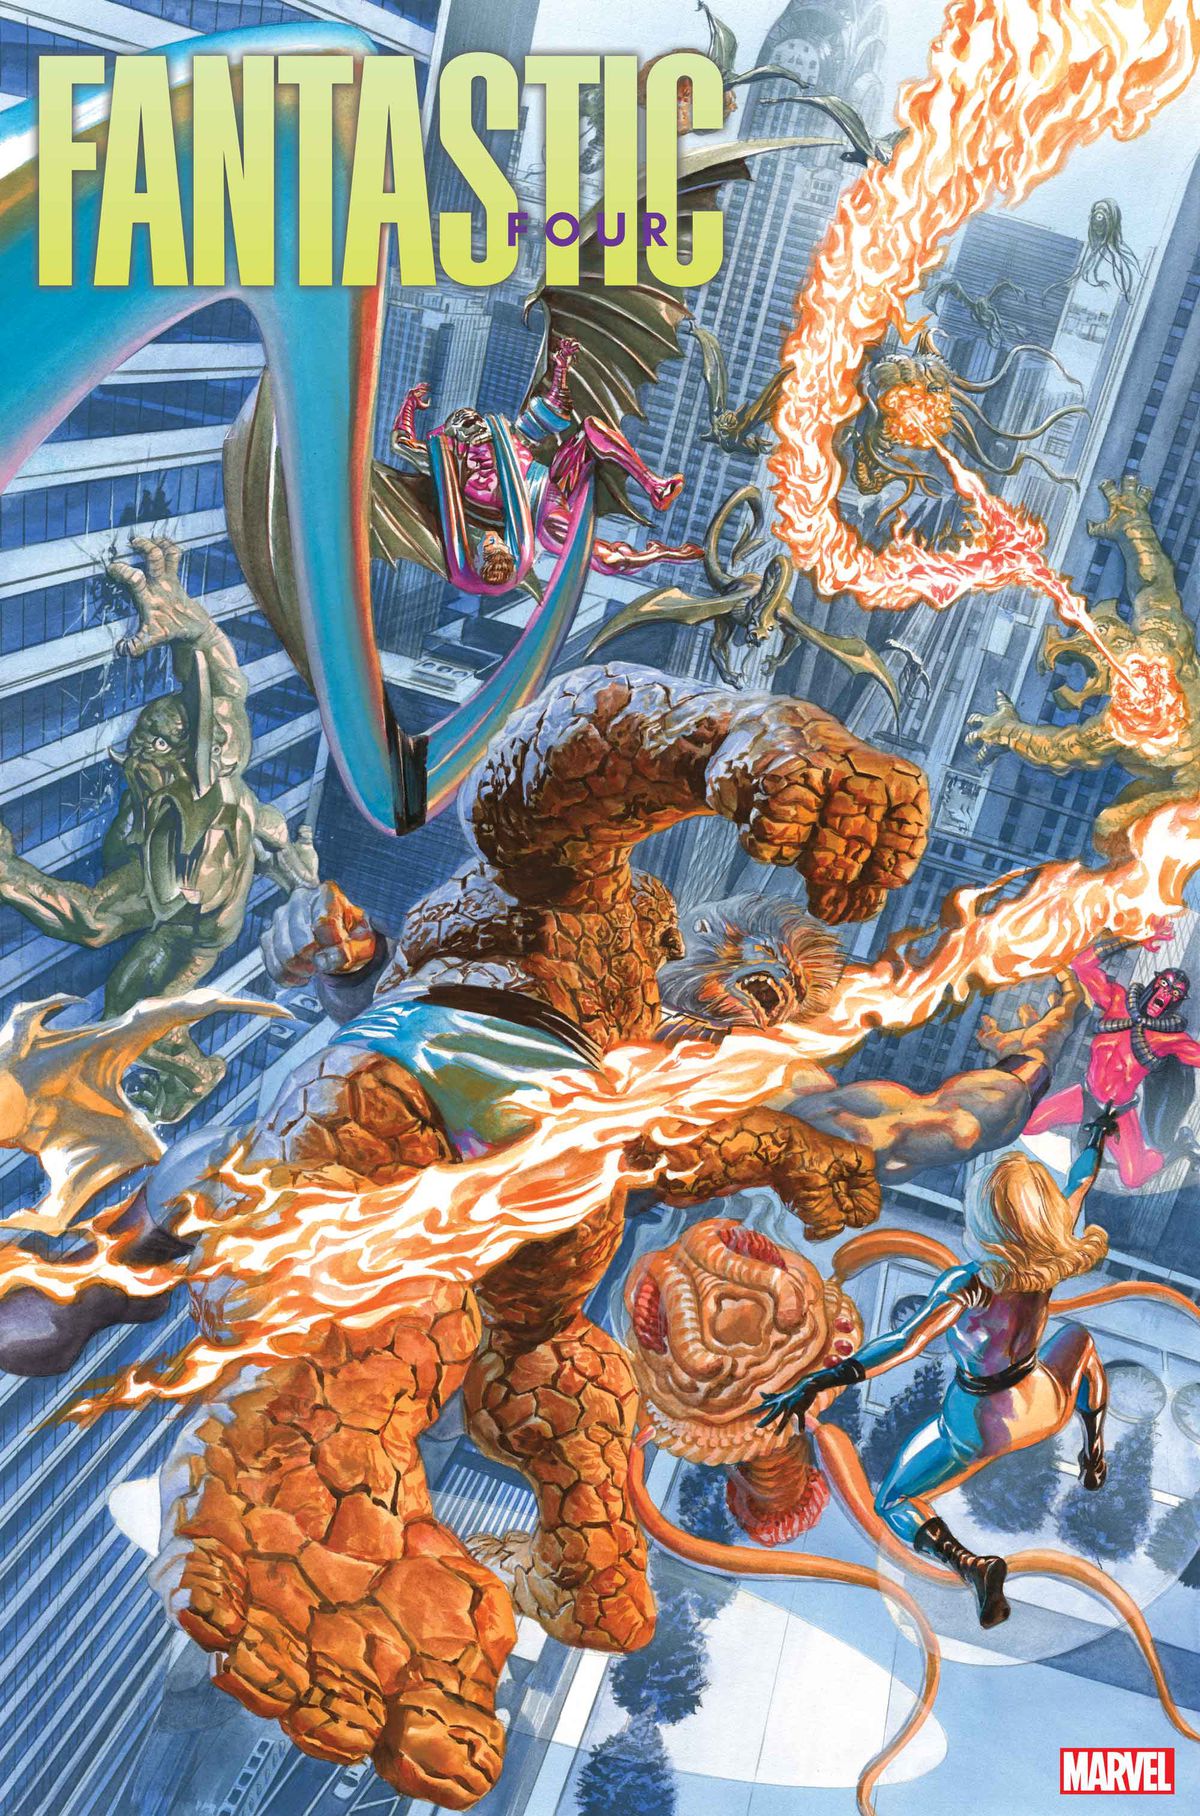 The Fantastic Four battle fantastic creatures on the cover of Fantastic Four #4 (2023).